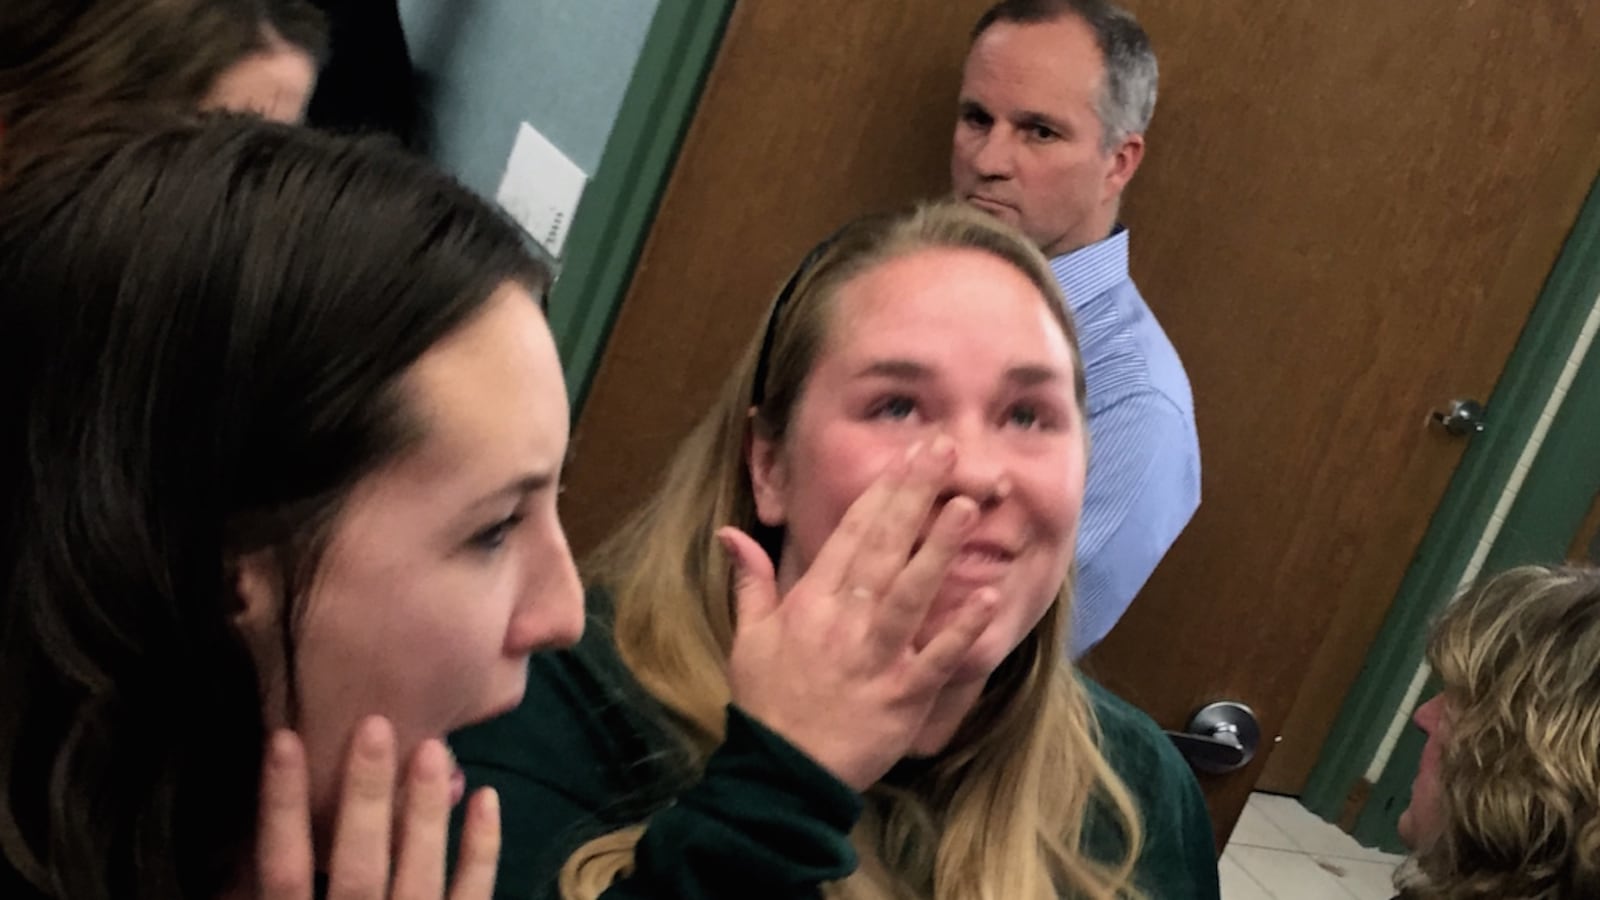 Members of AXL Academy charter school community, including Amber Malin, center, celebrated Tuesday night after the Aurora Public Schools Board of Education gave the financially struggling school a tentative lifeline.